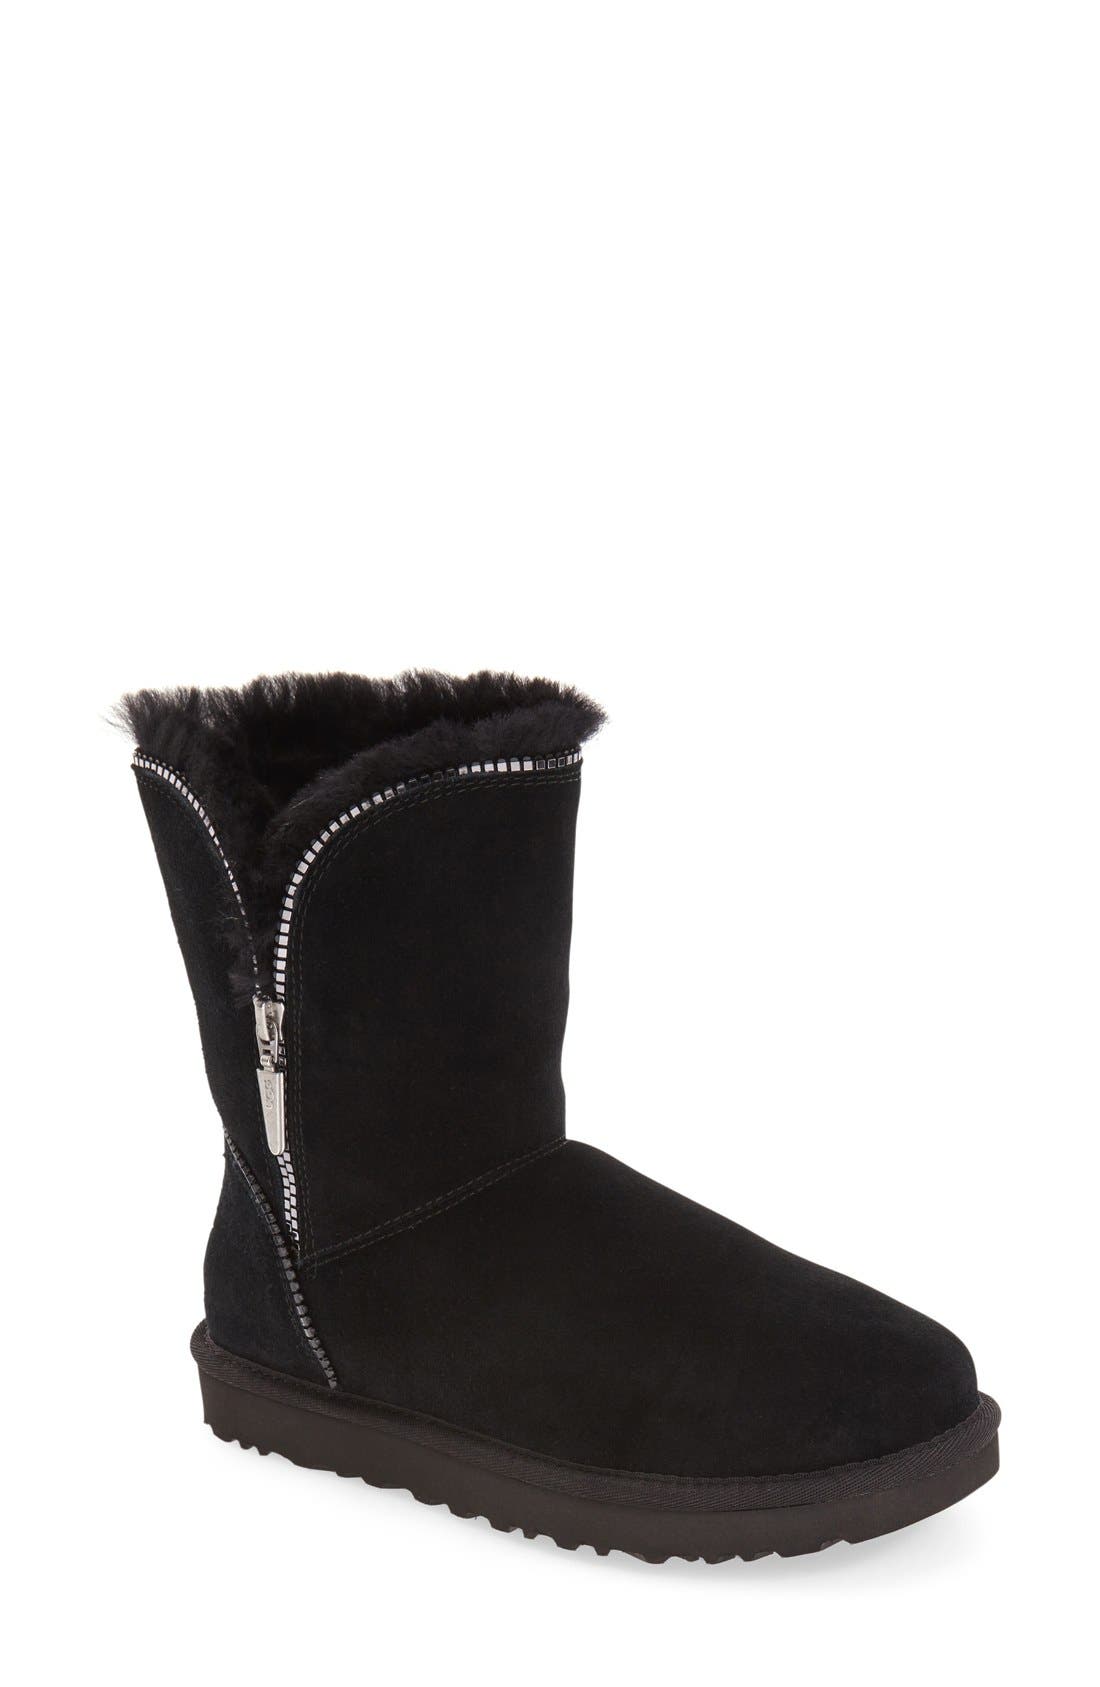 women's florence uggs